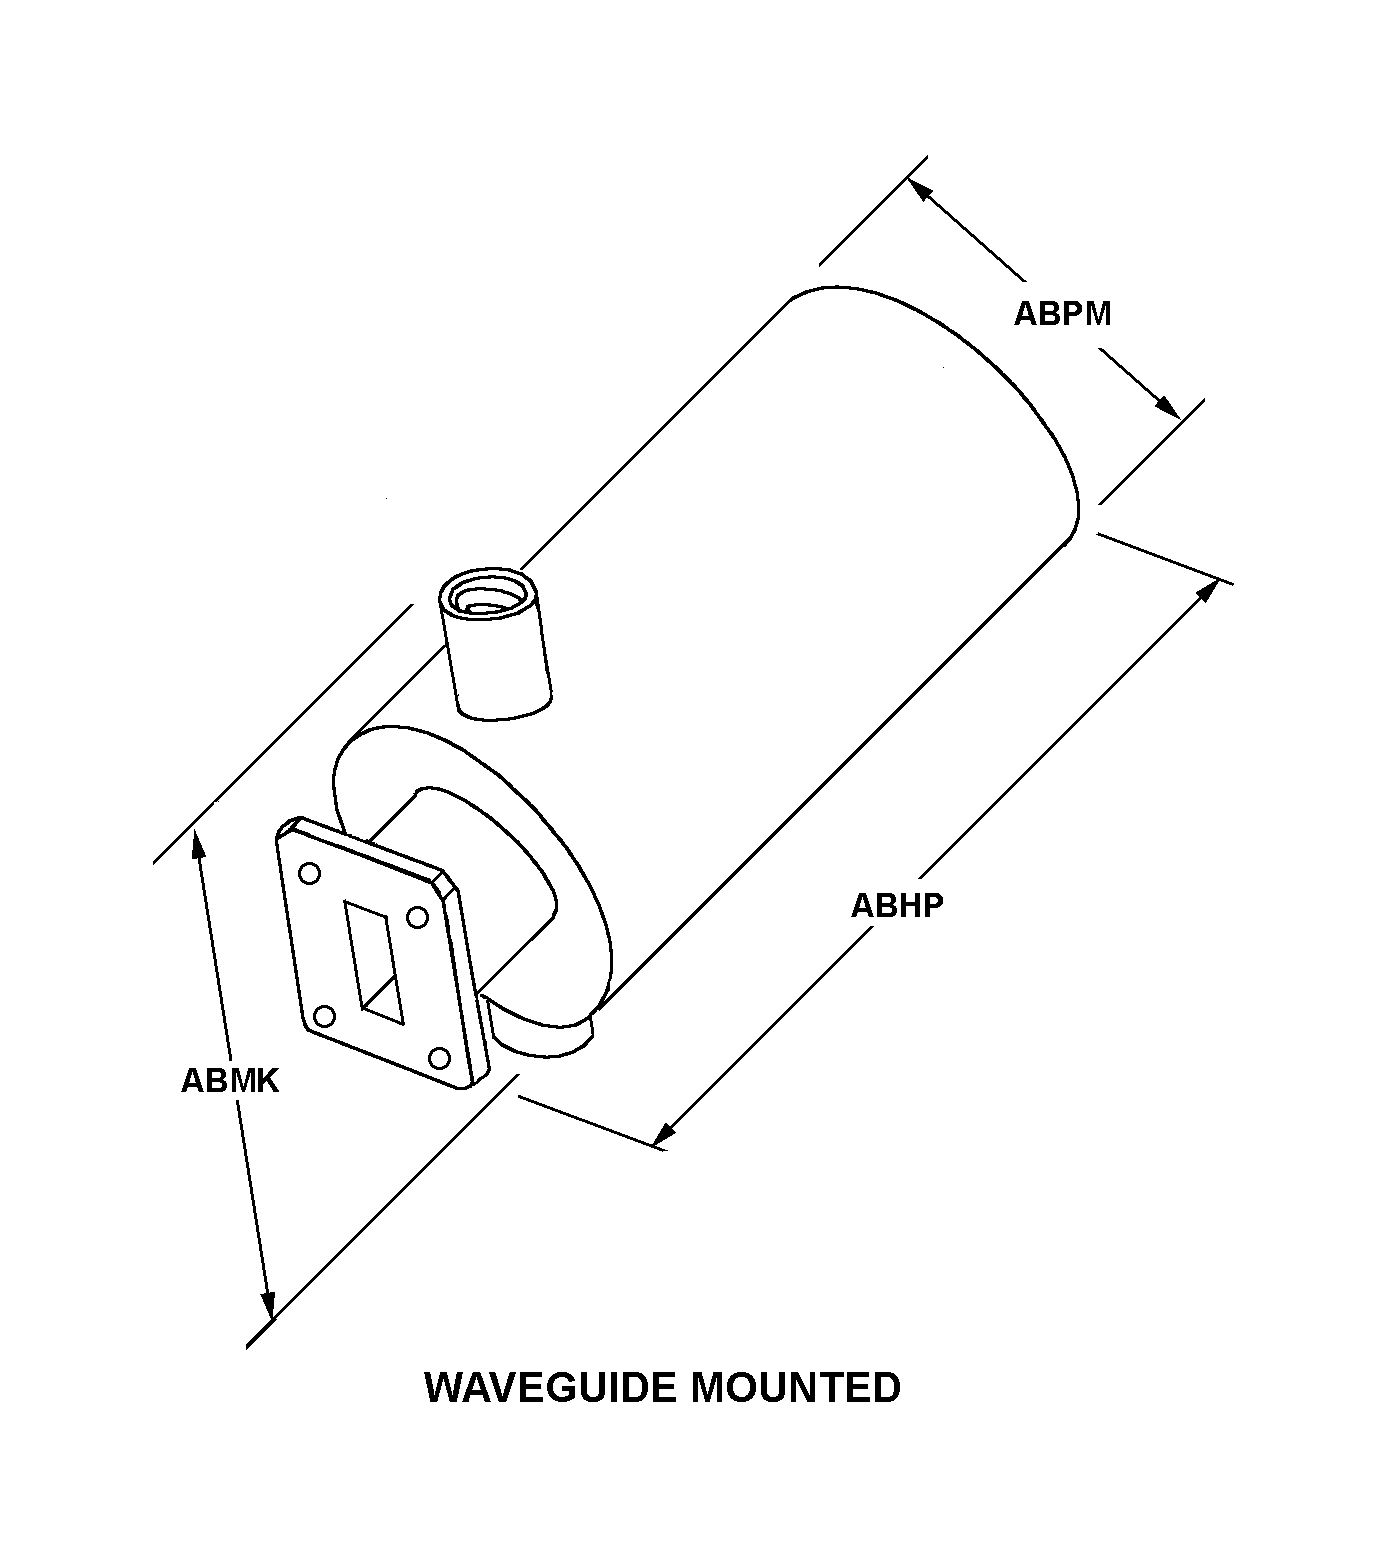 WAVEGUIDE MOUNTED style nsn 5985-00-177-7129